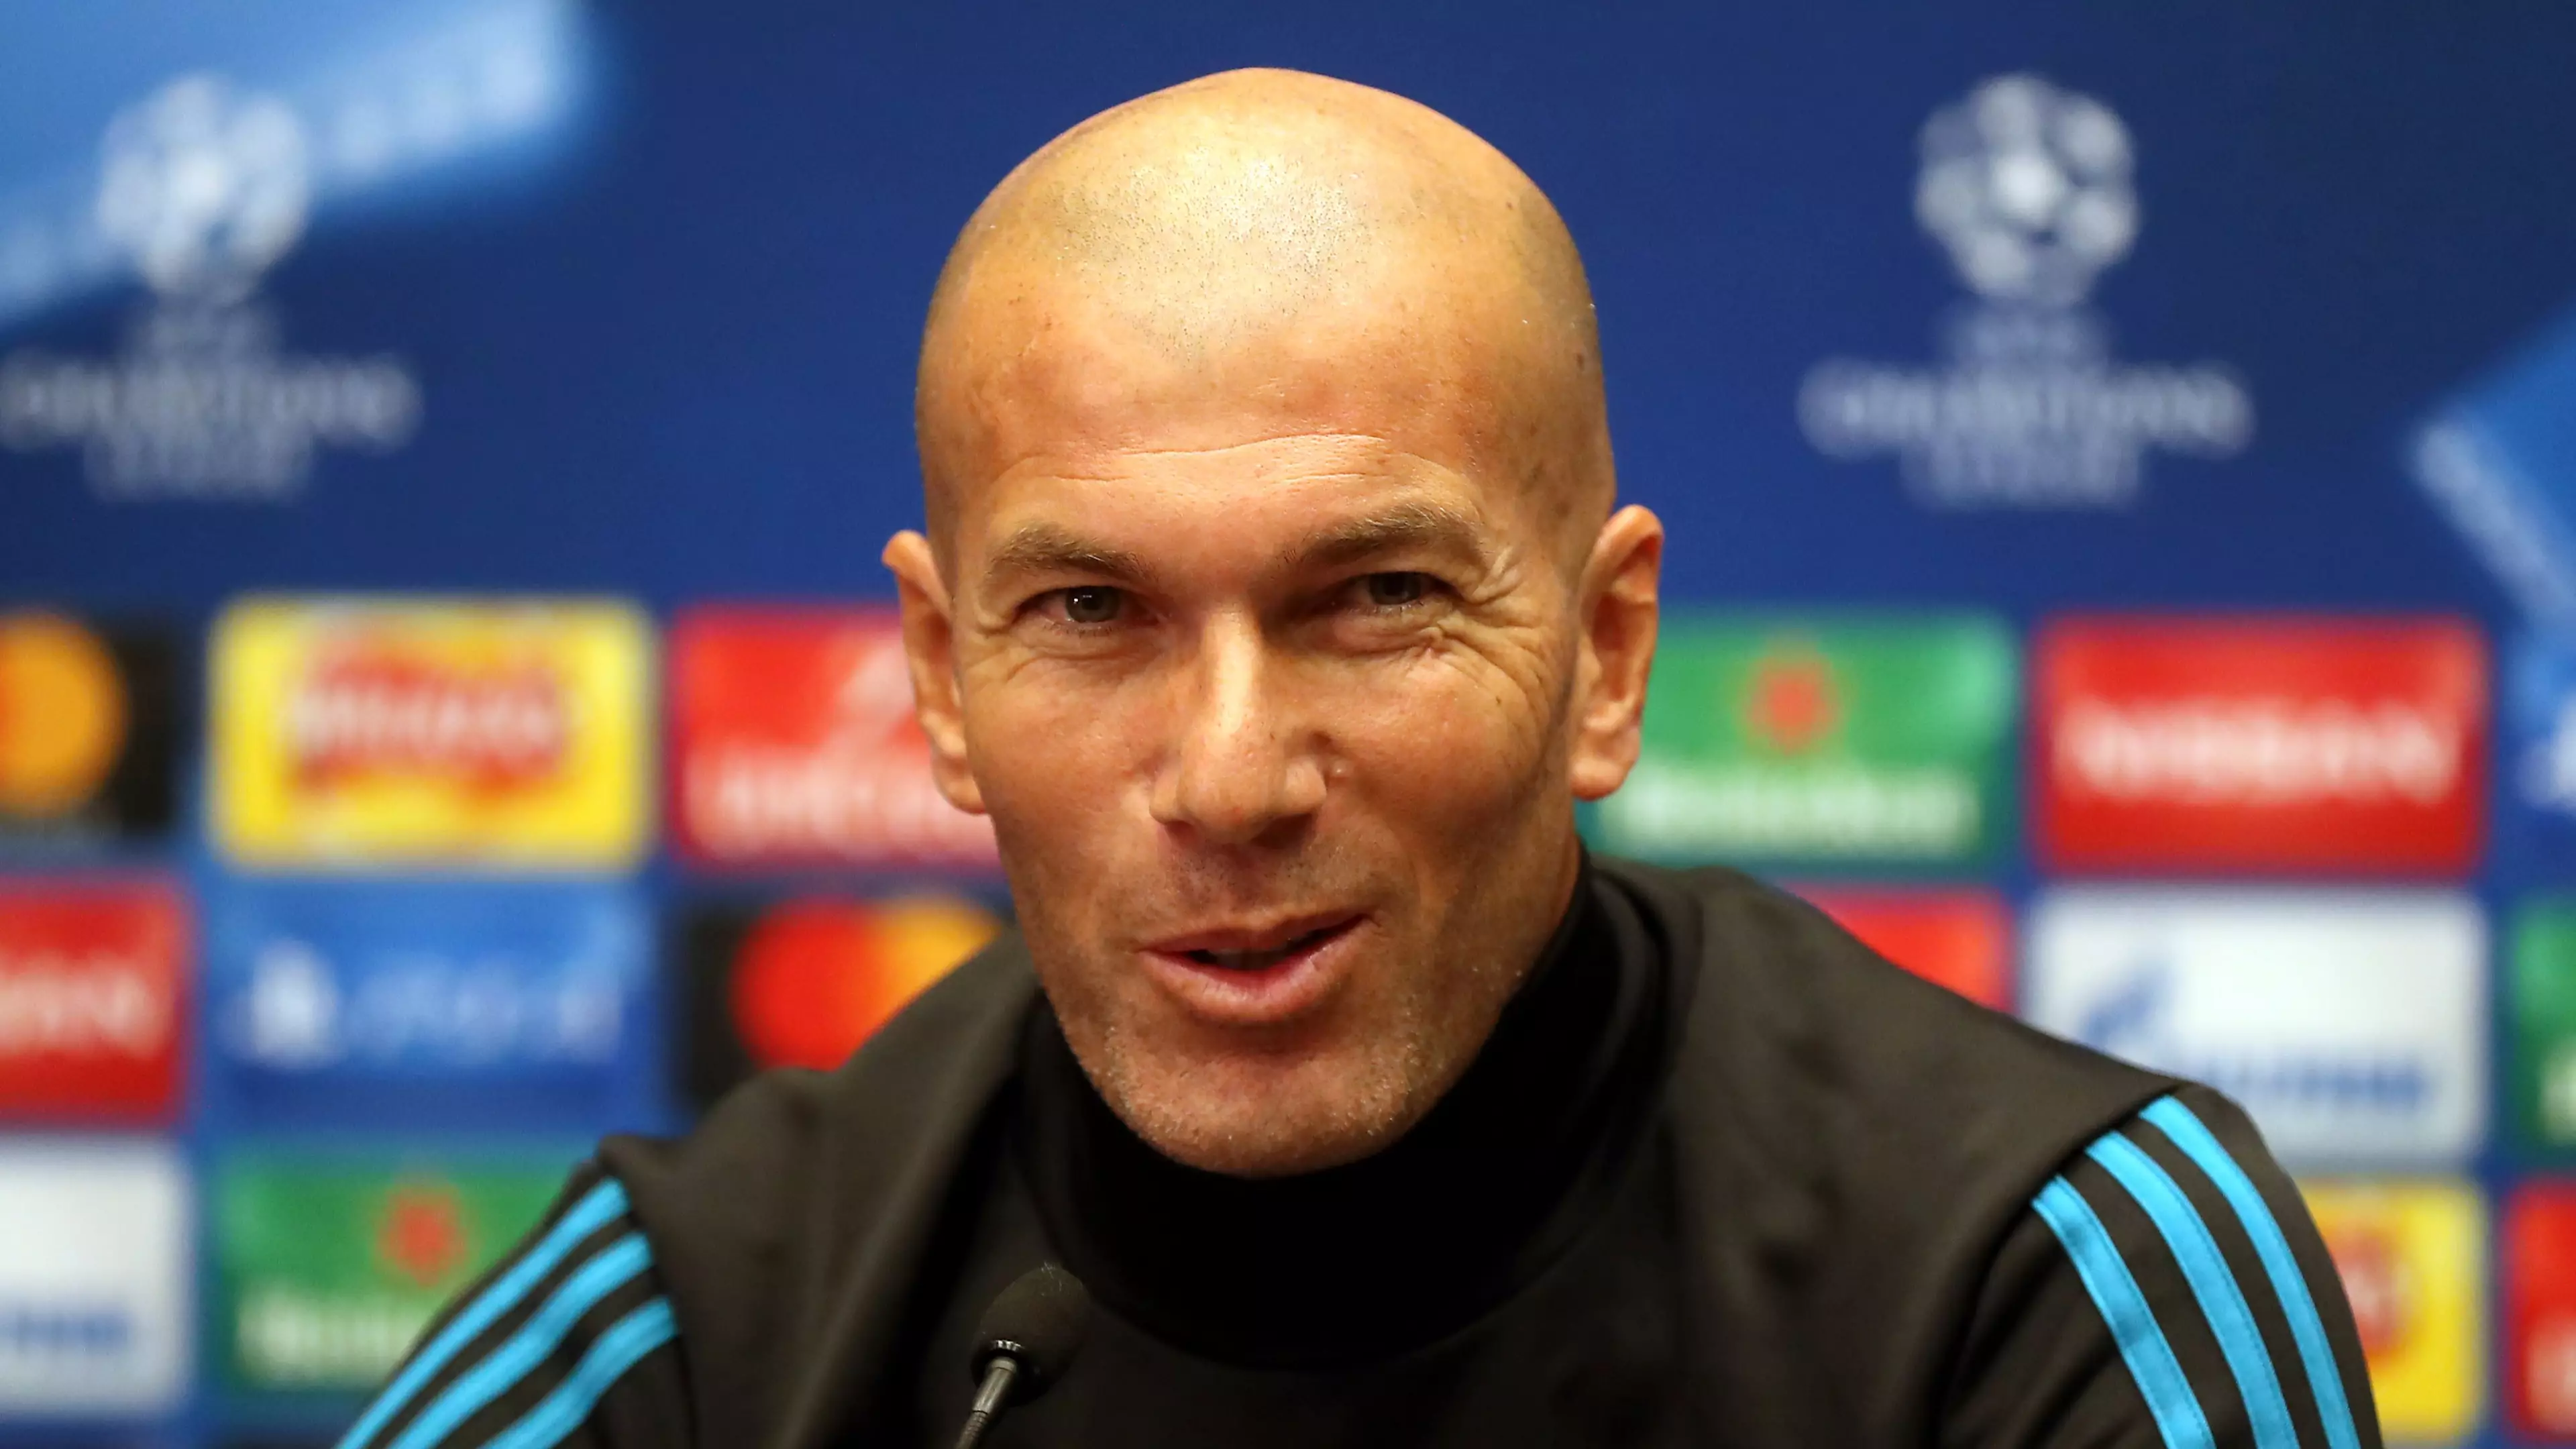 Zidane's Highlights From A Friendly Match Shows He Still Had It At 42